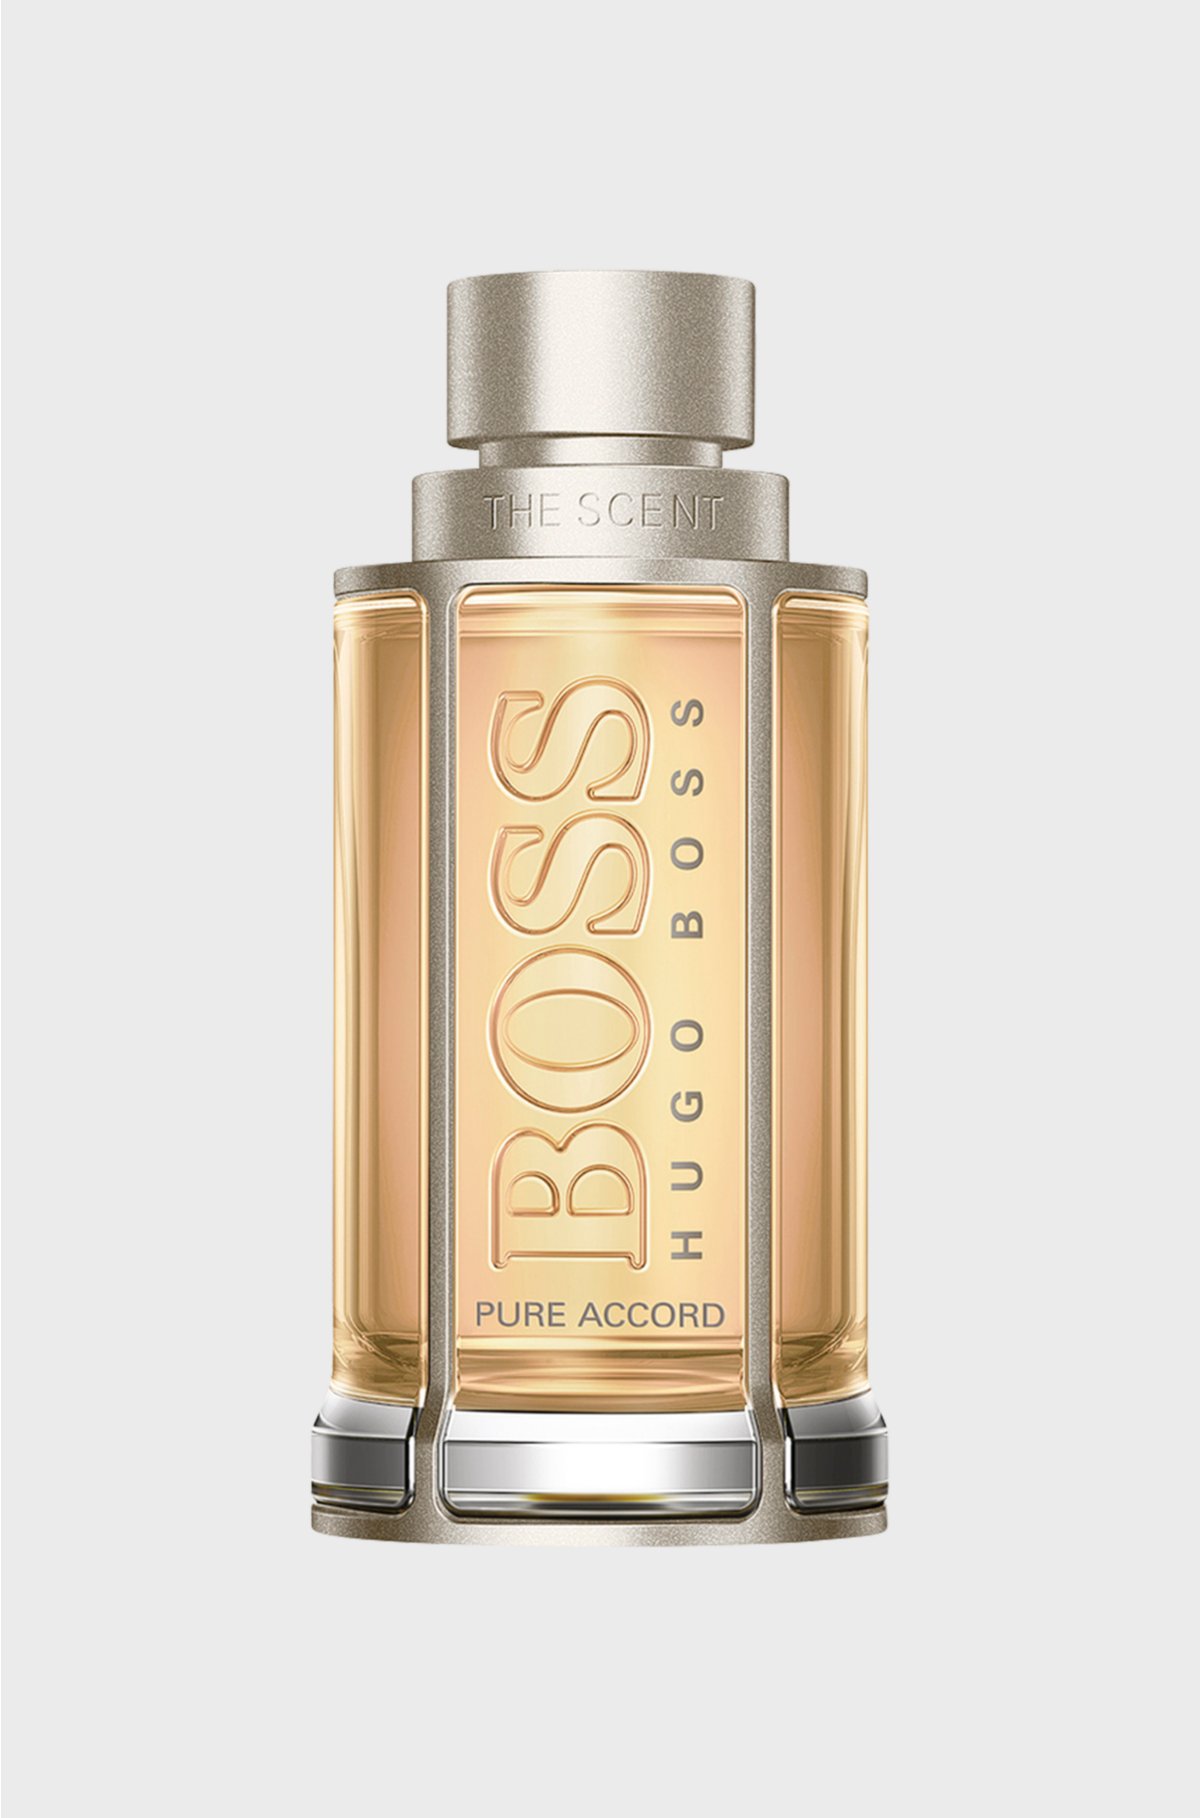 BOSS The Scent Pure Accord for Him eau de toilette 50ml, Assorted-Pre-Pack